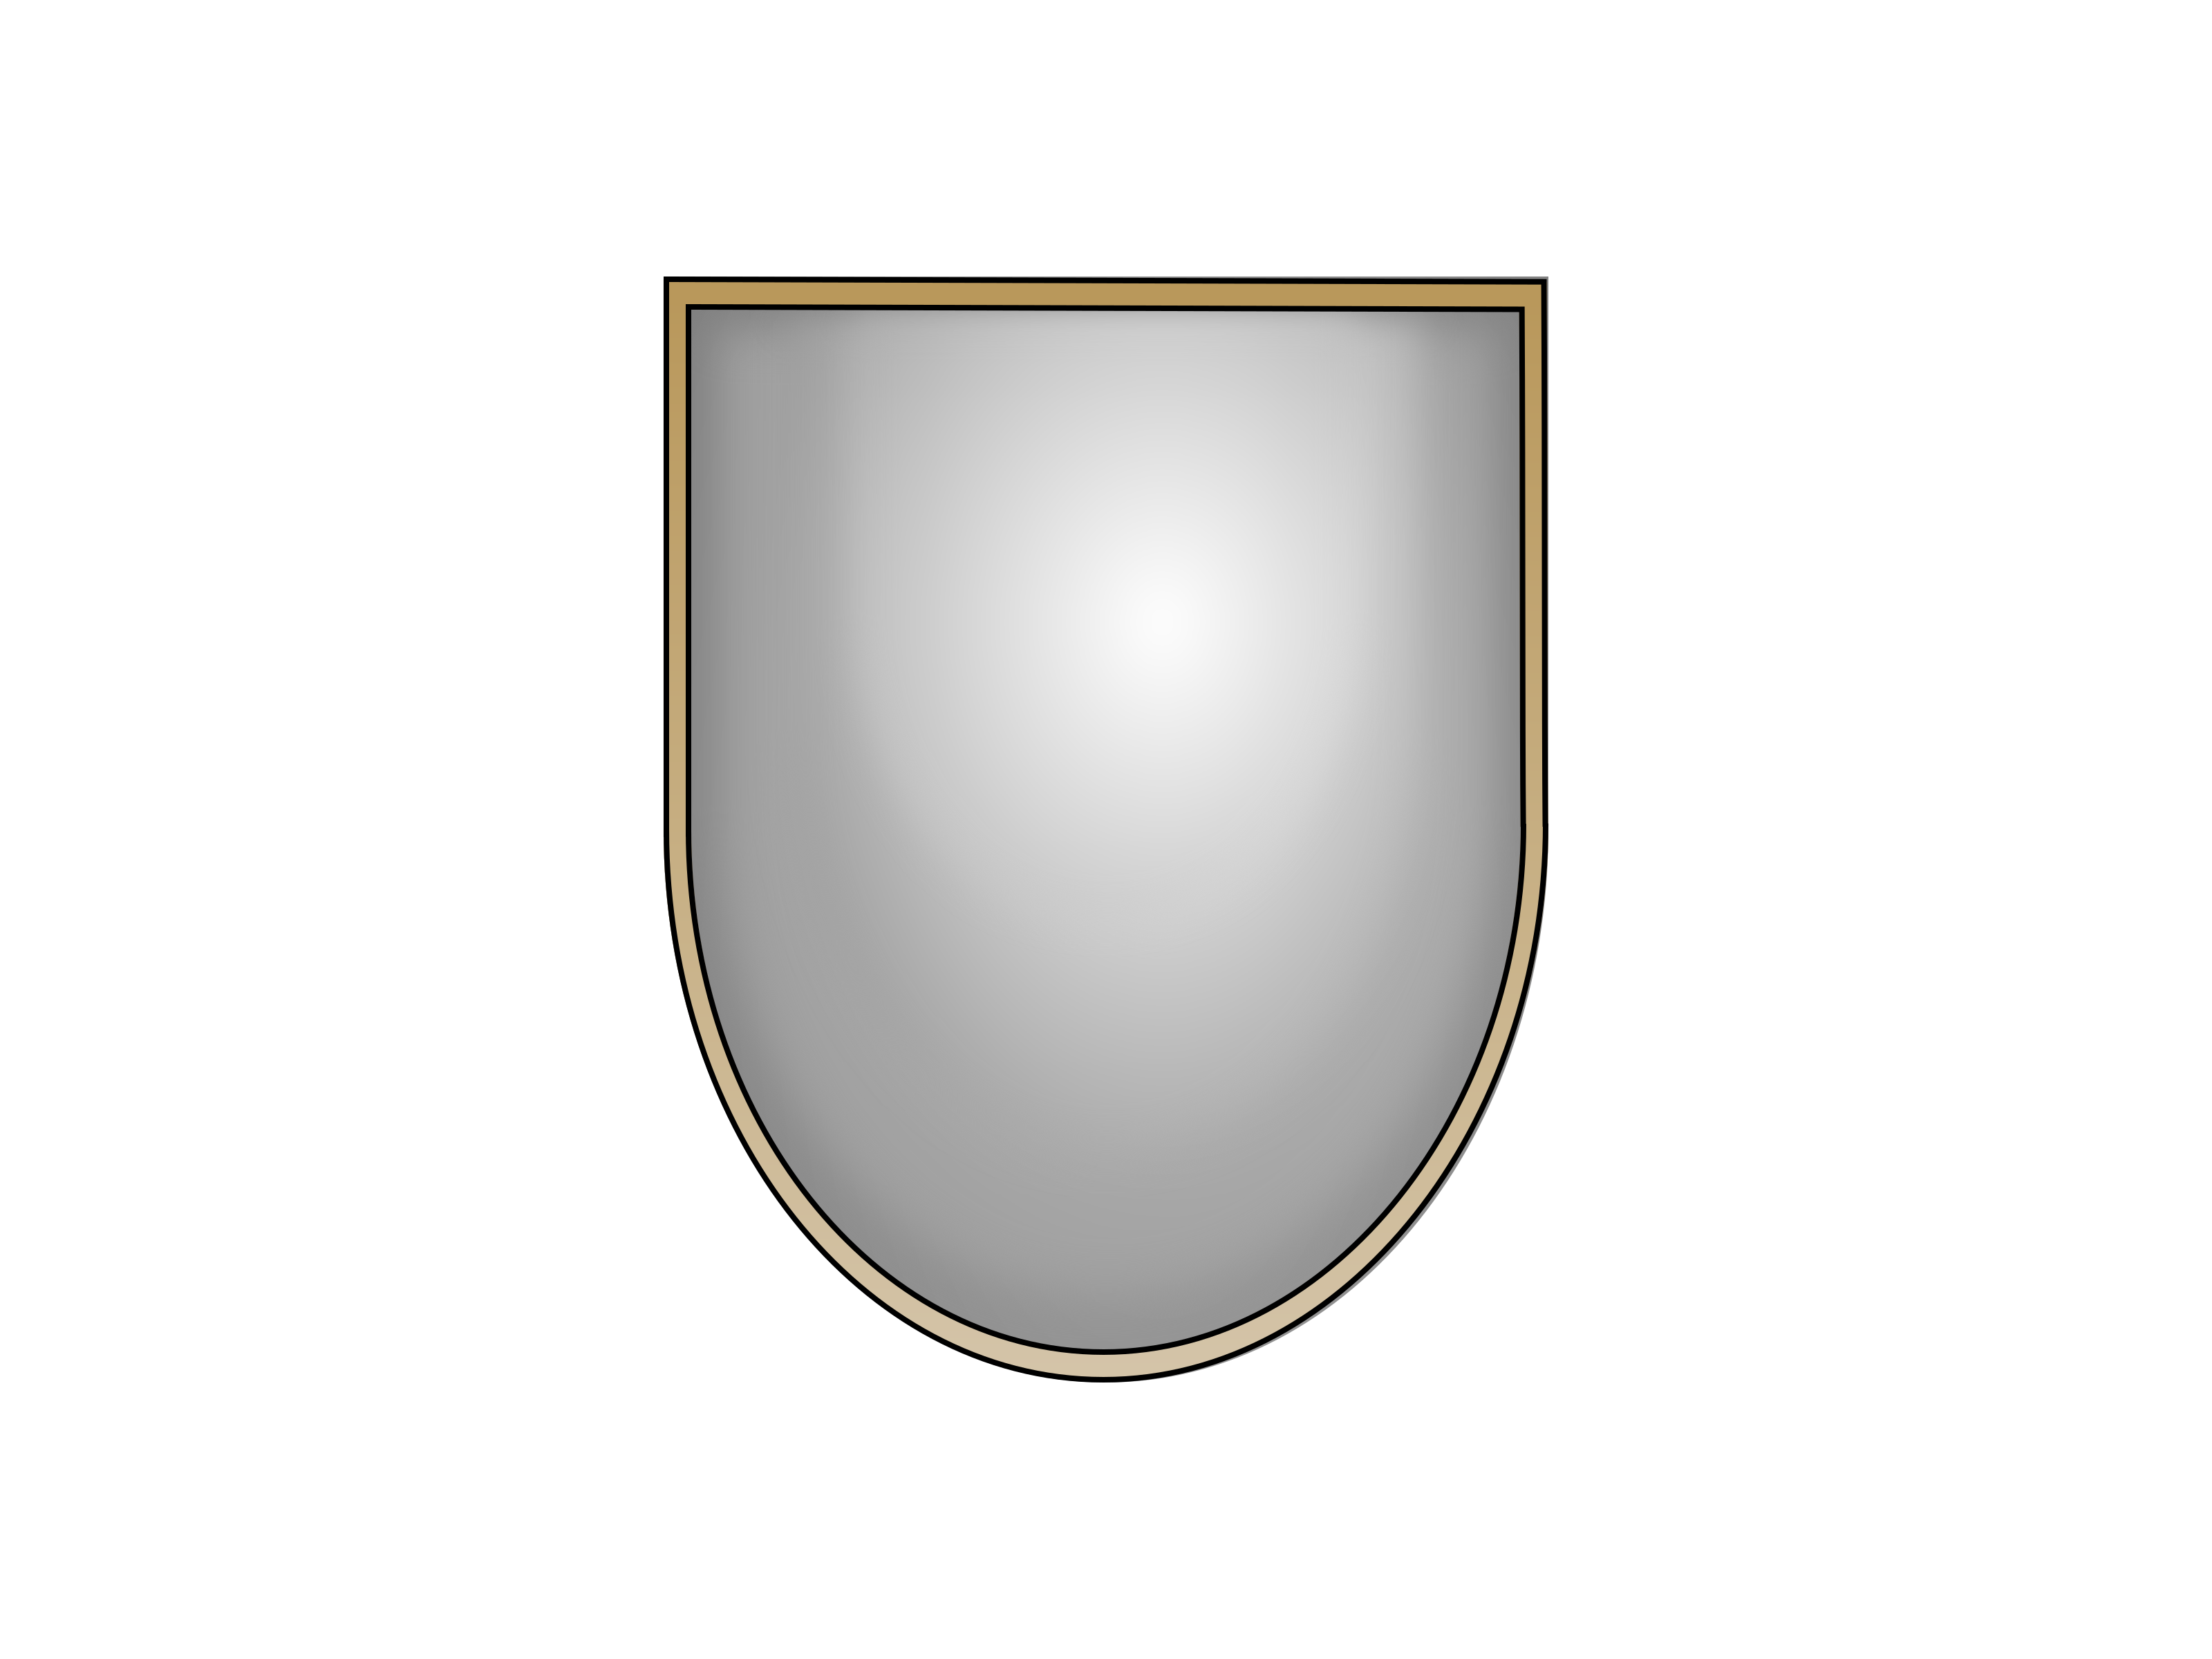 Clipart Shield Pdf Clipart Shield Pdf Transparent Free For Download On Webstockreview 2020 - clipart shield pdf roblox t shirt png cliparts cartoons jing fm